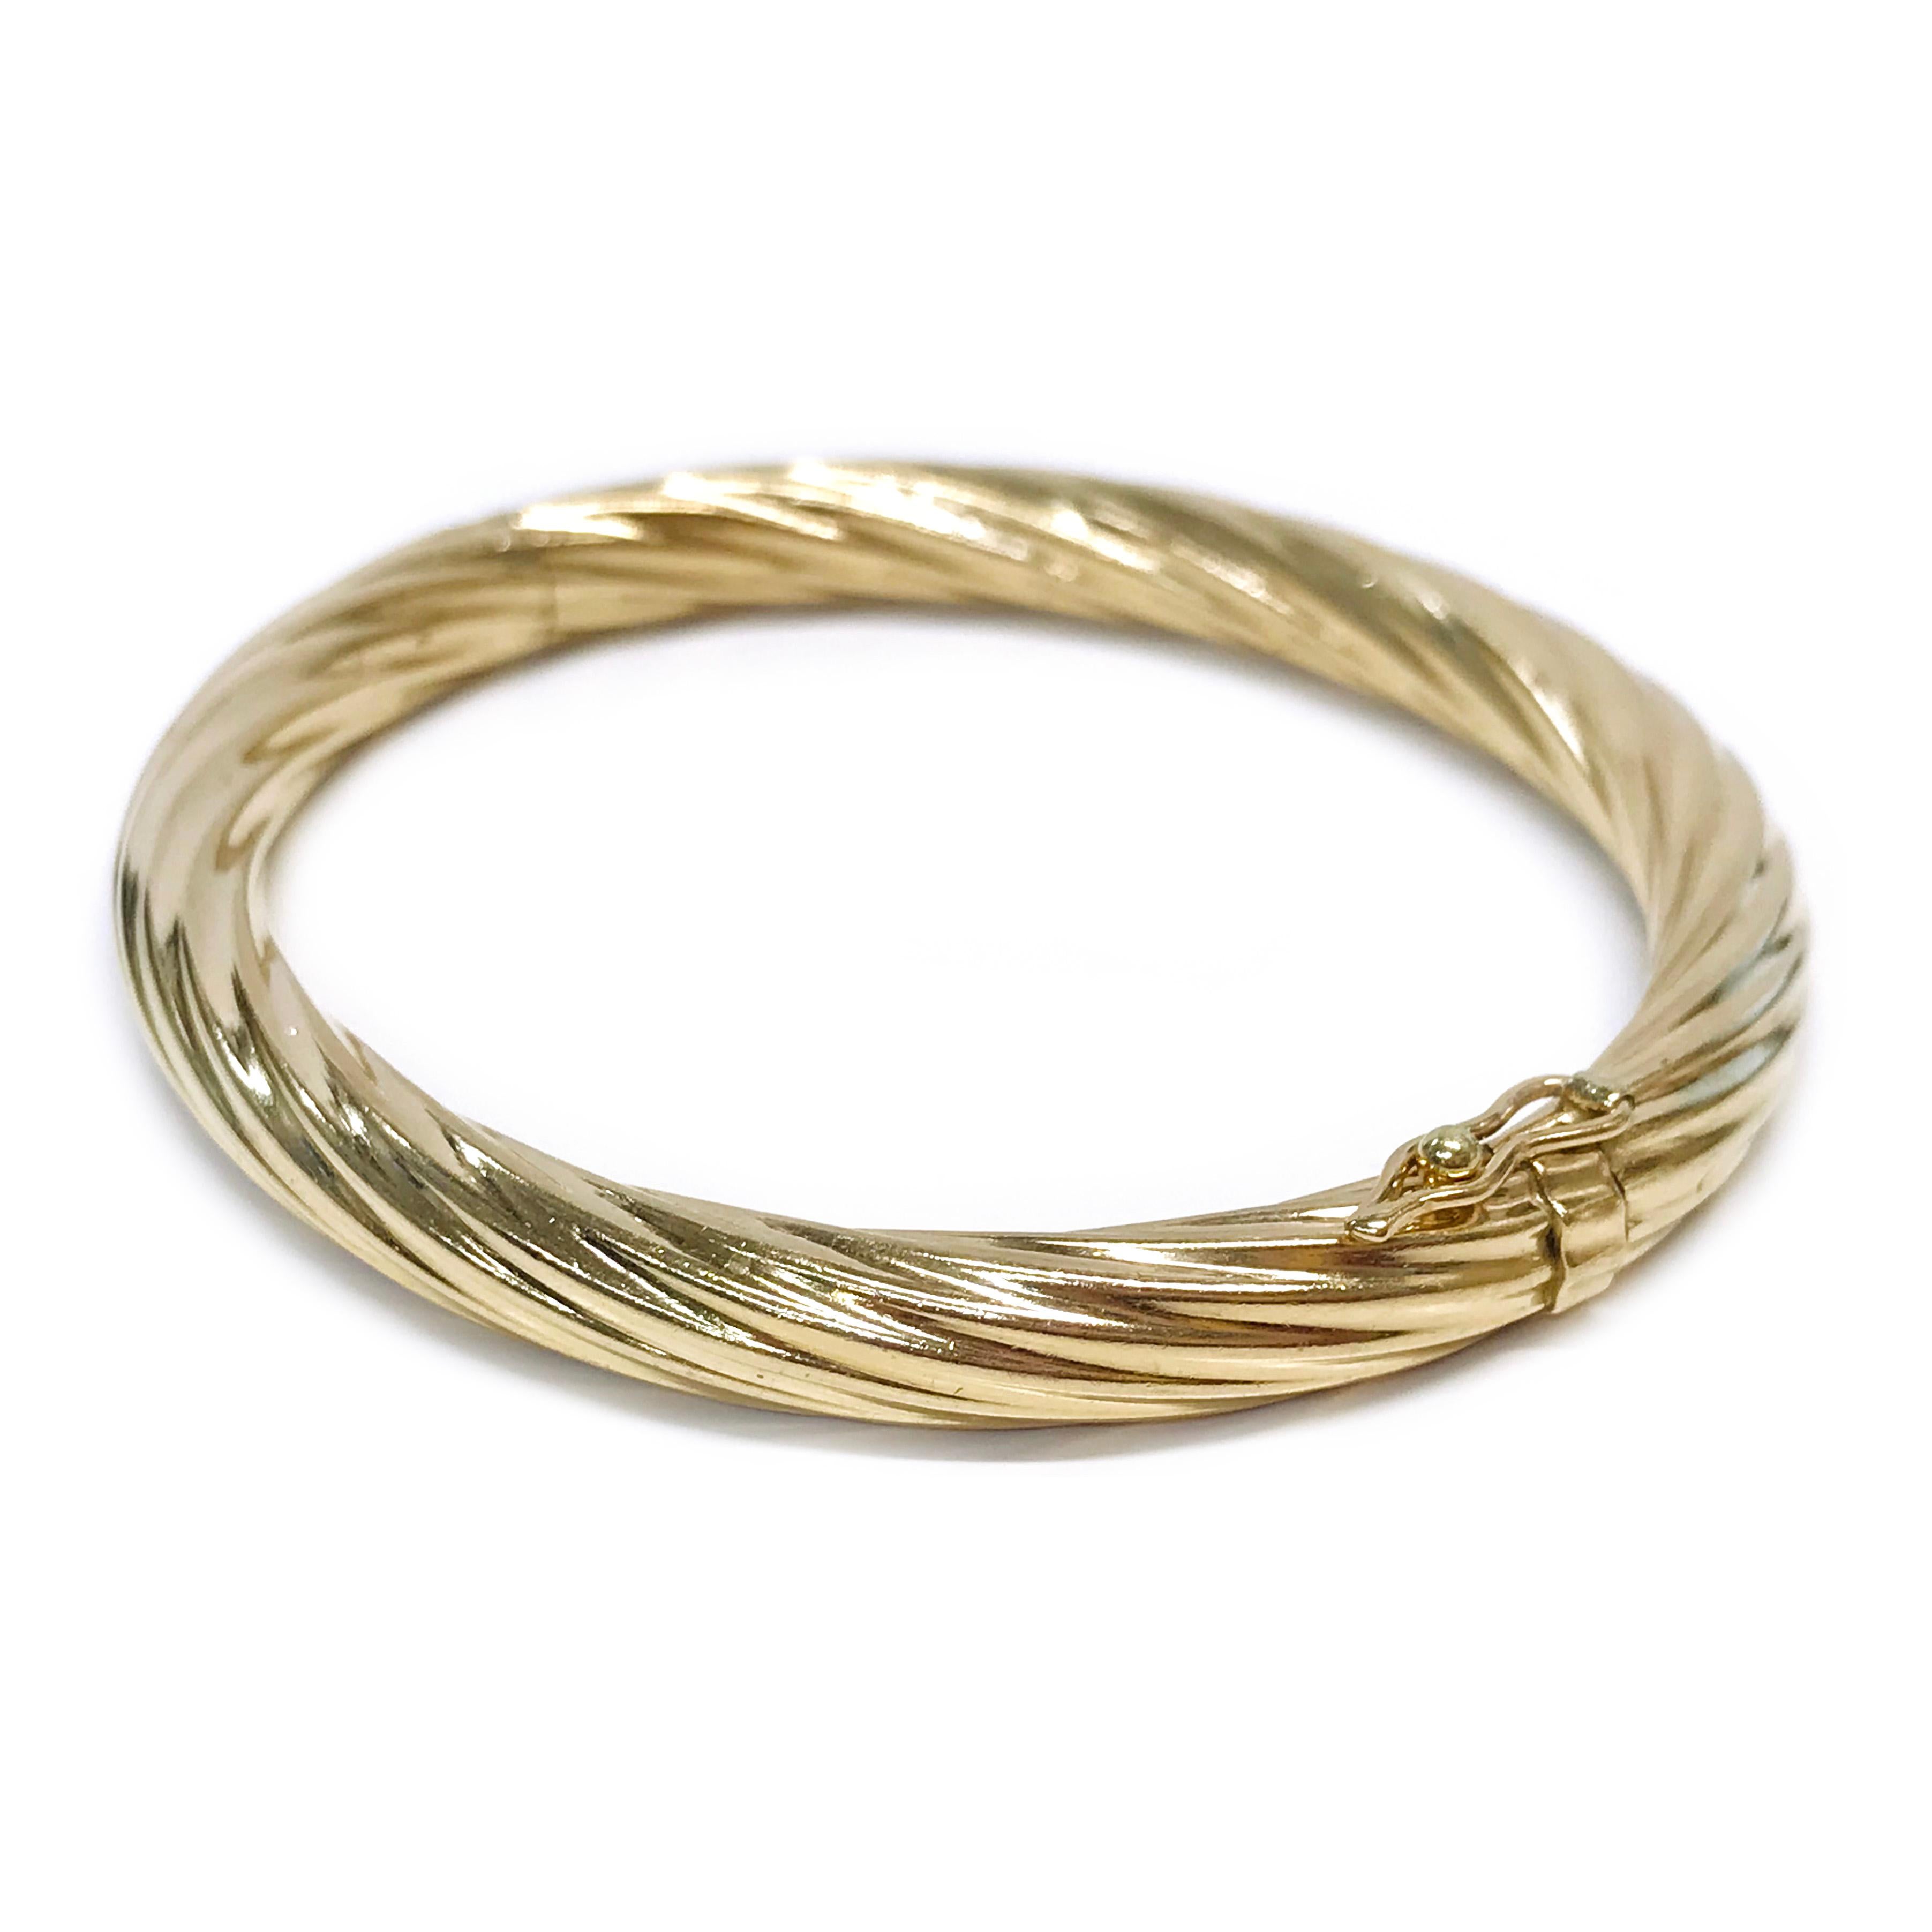 14 Karat Yellow Gold Hinged Cable Bangle Bracelet. The classic cable bangle is semi-oval with a width of 6.2mm. Stamped on the clasp is the maker's mark B. The total gold weight of the bangle bracelet is 16.7 grams.